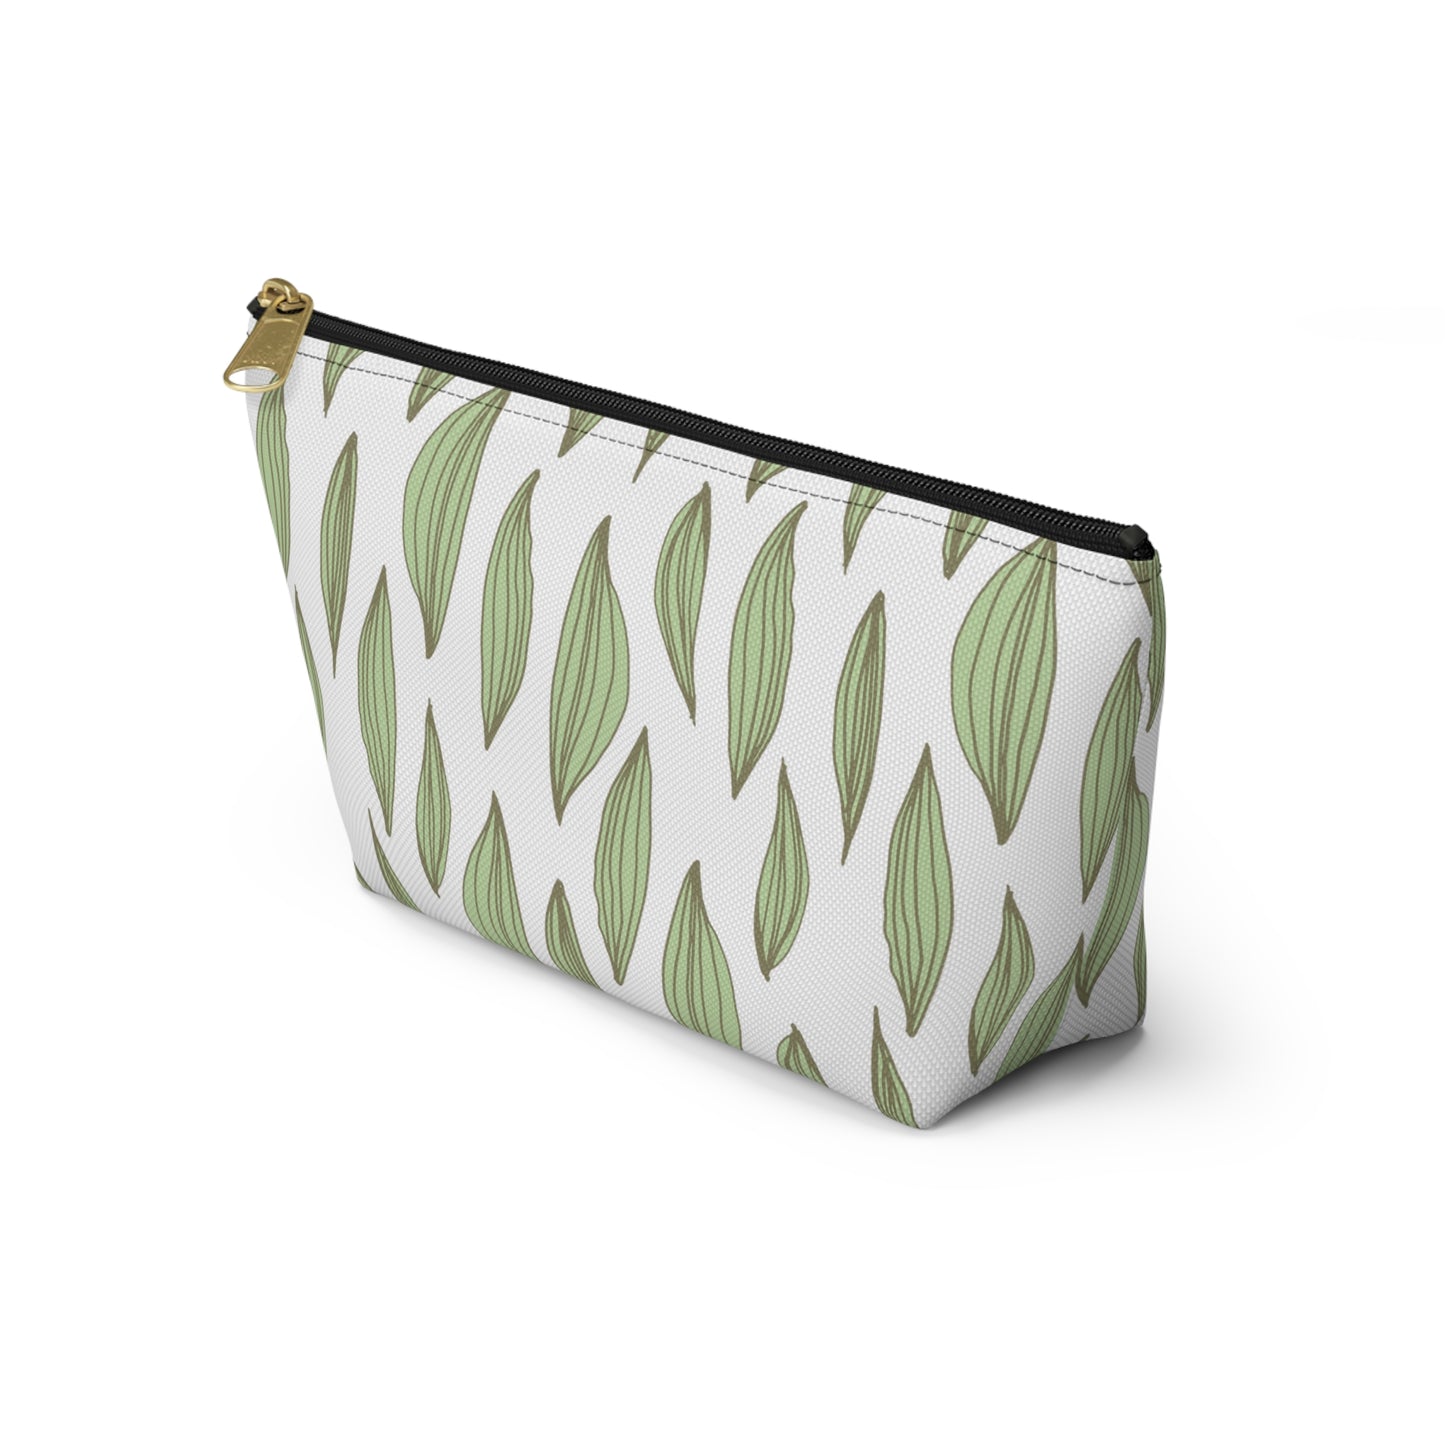 Accessory Pouch - Leaf Pattern